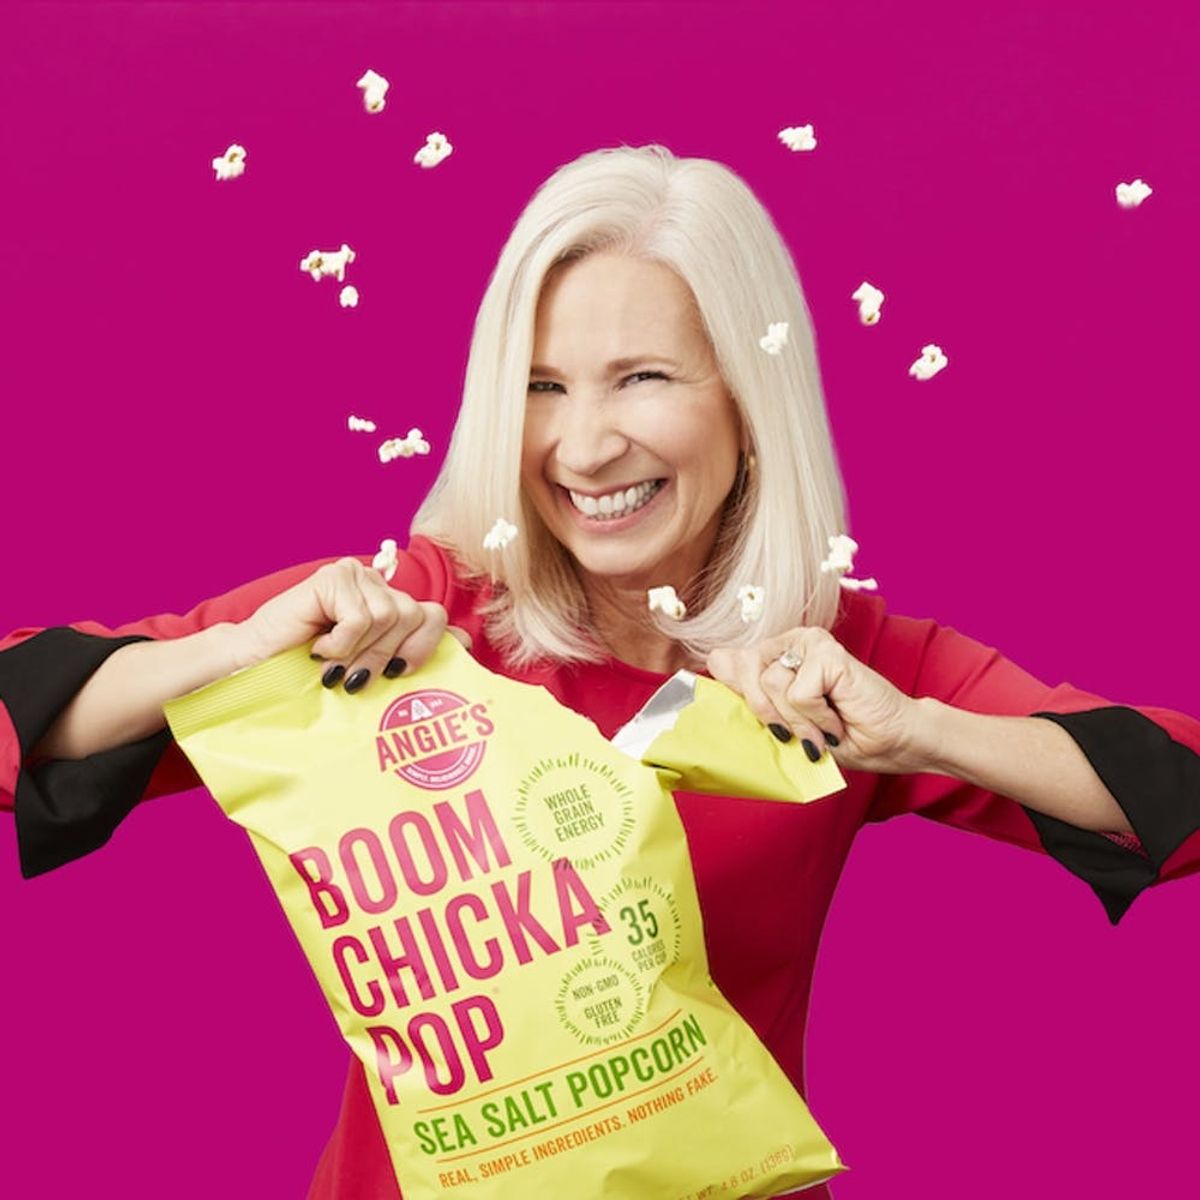 Angie’s Boomchickapop Started in a Family Garage Before Becoming a Super Snack Brand